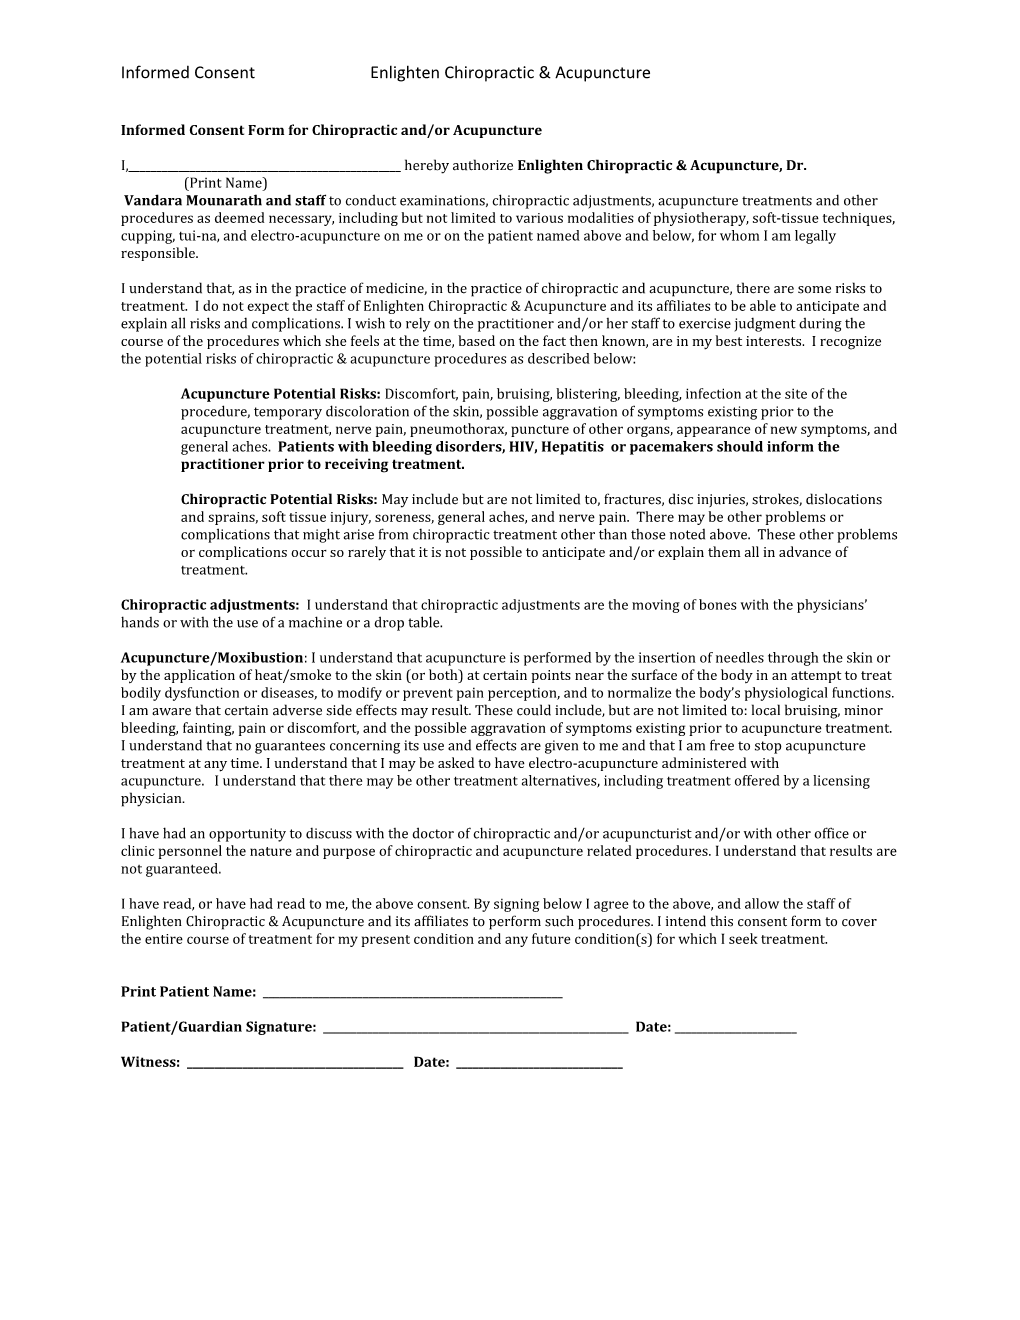 Informed Consent Form for Chiropractic And/Or Acupuncture